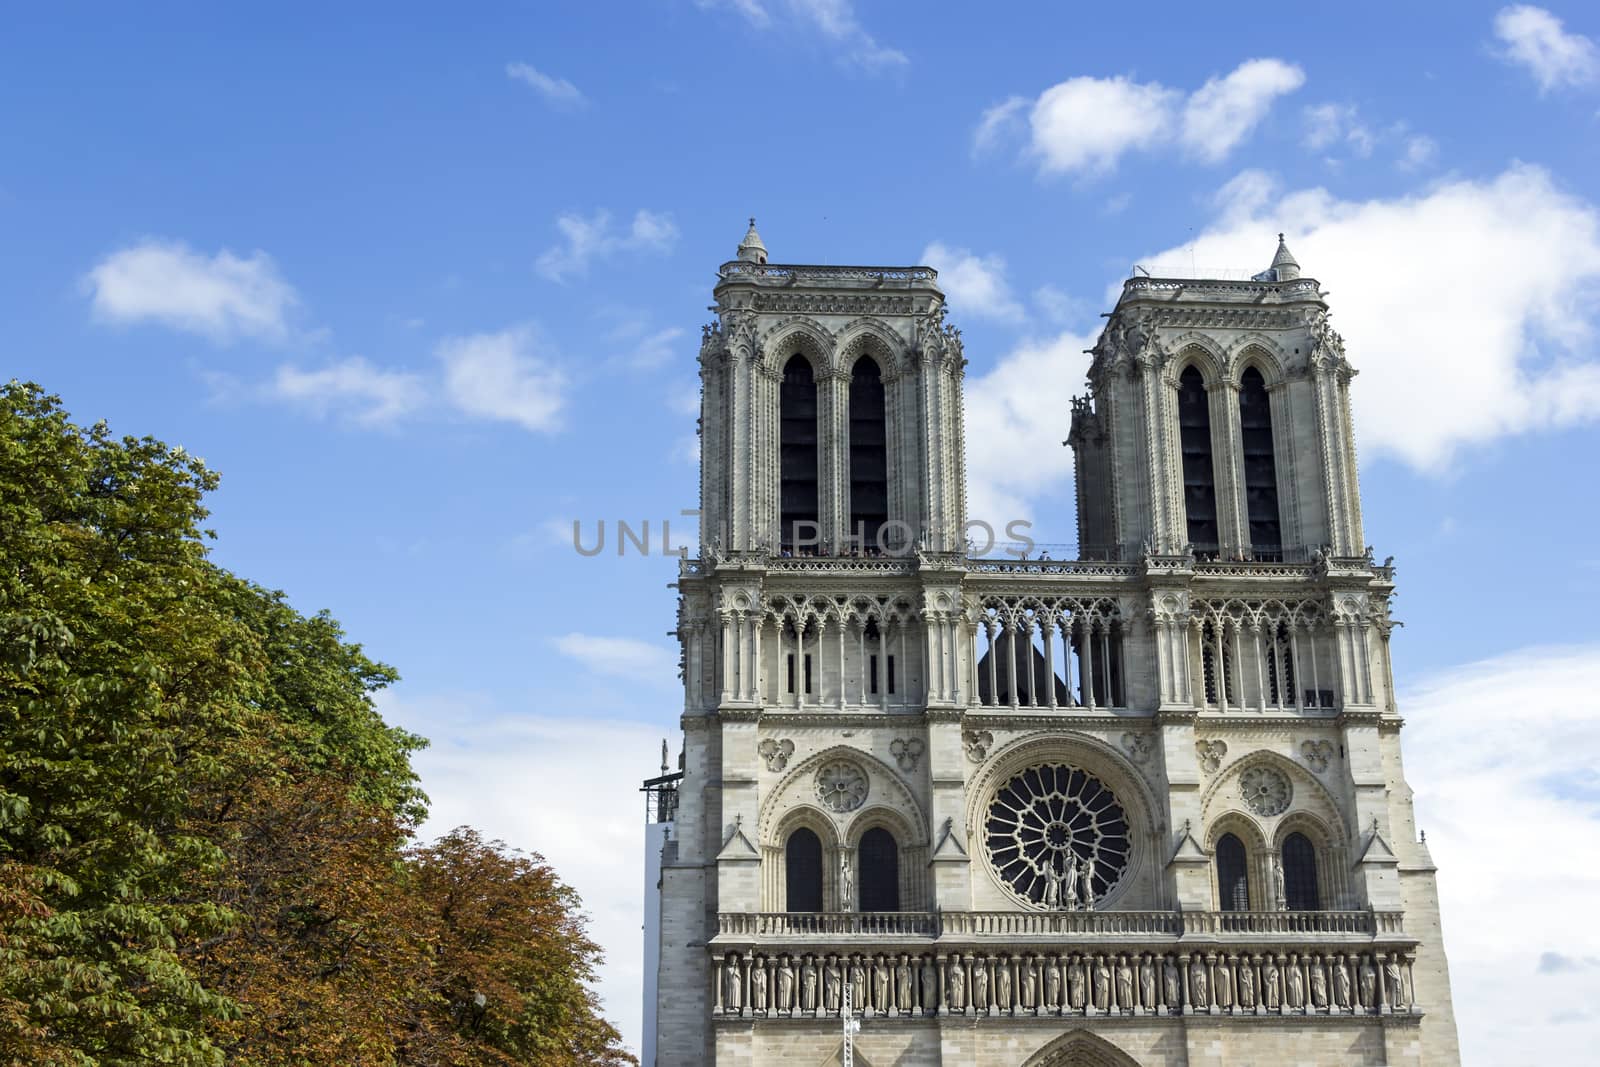 Notre Dame de Paris cathedral at late summer by Tetyana